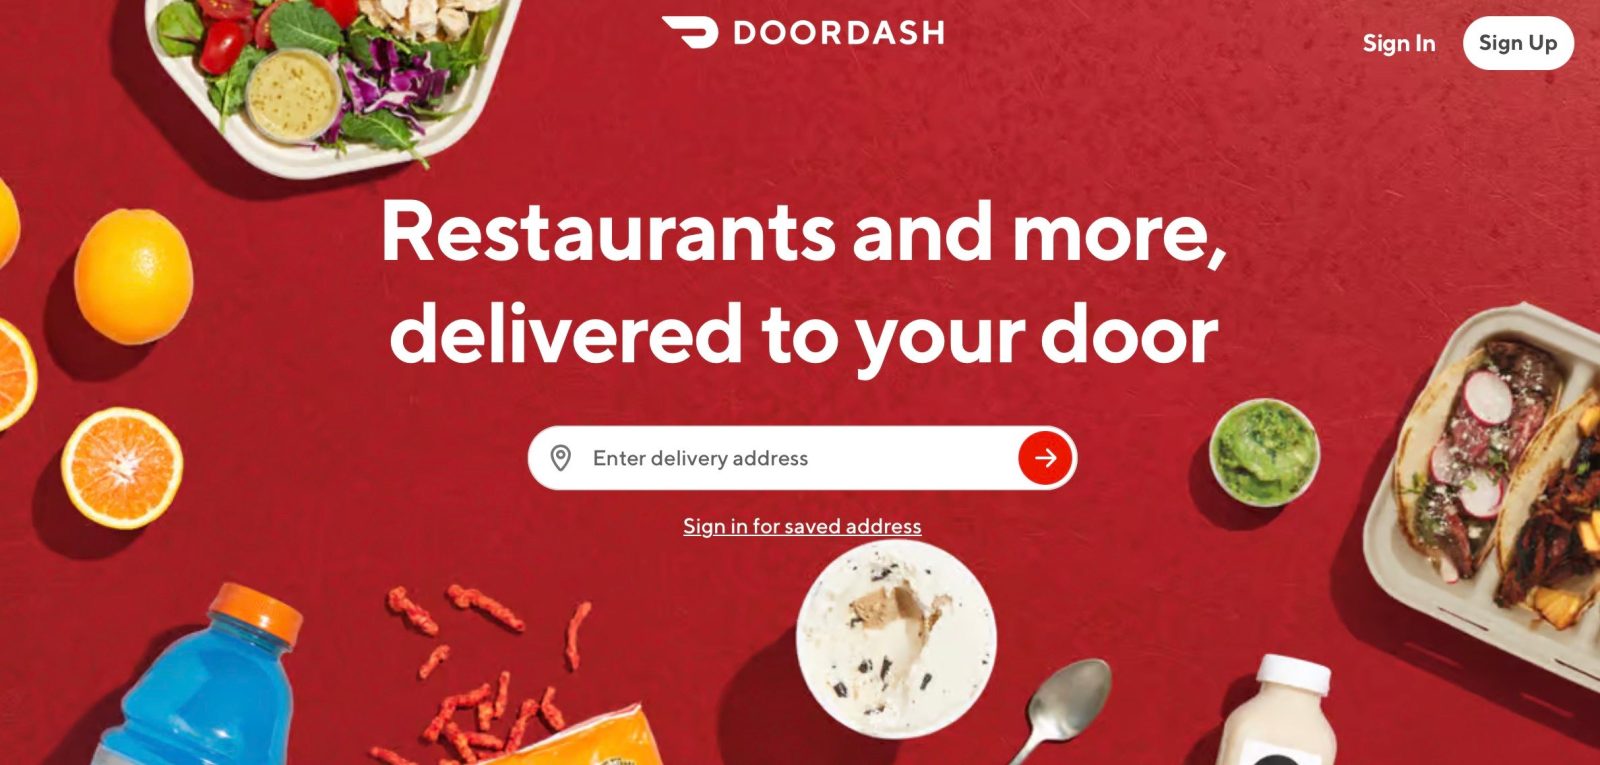 Doordash charges iphone users more than android users lawsuit alleges